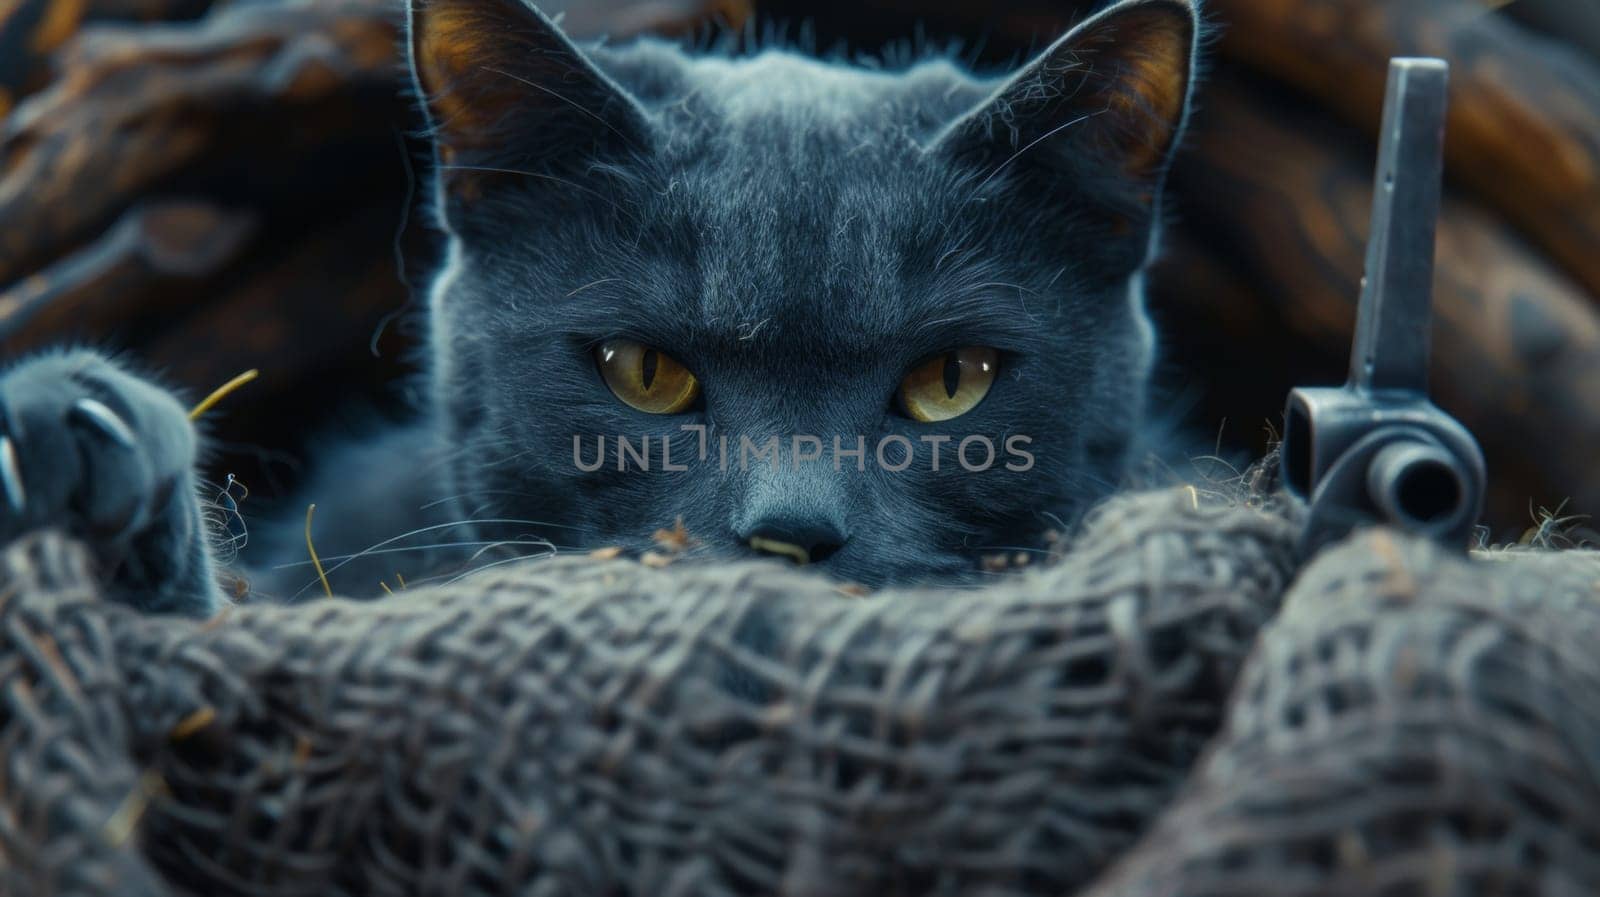 A black cat with yellow eyes peeking out from behind a piece of rope, AI by starush